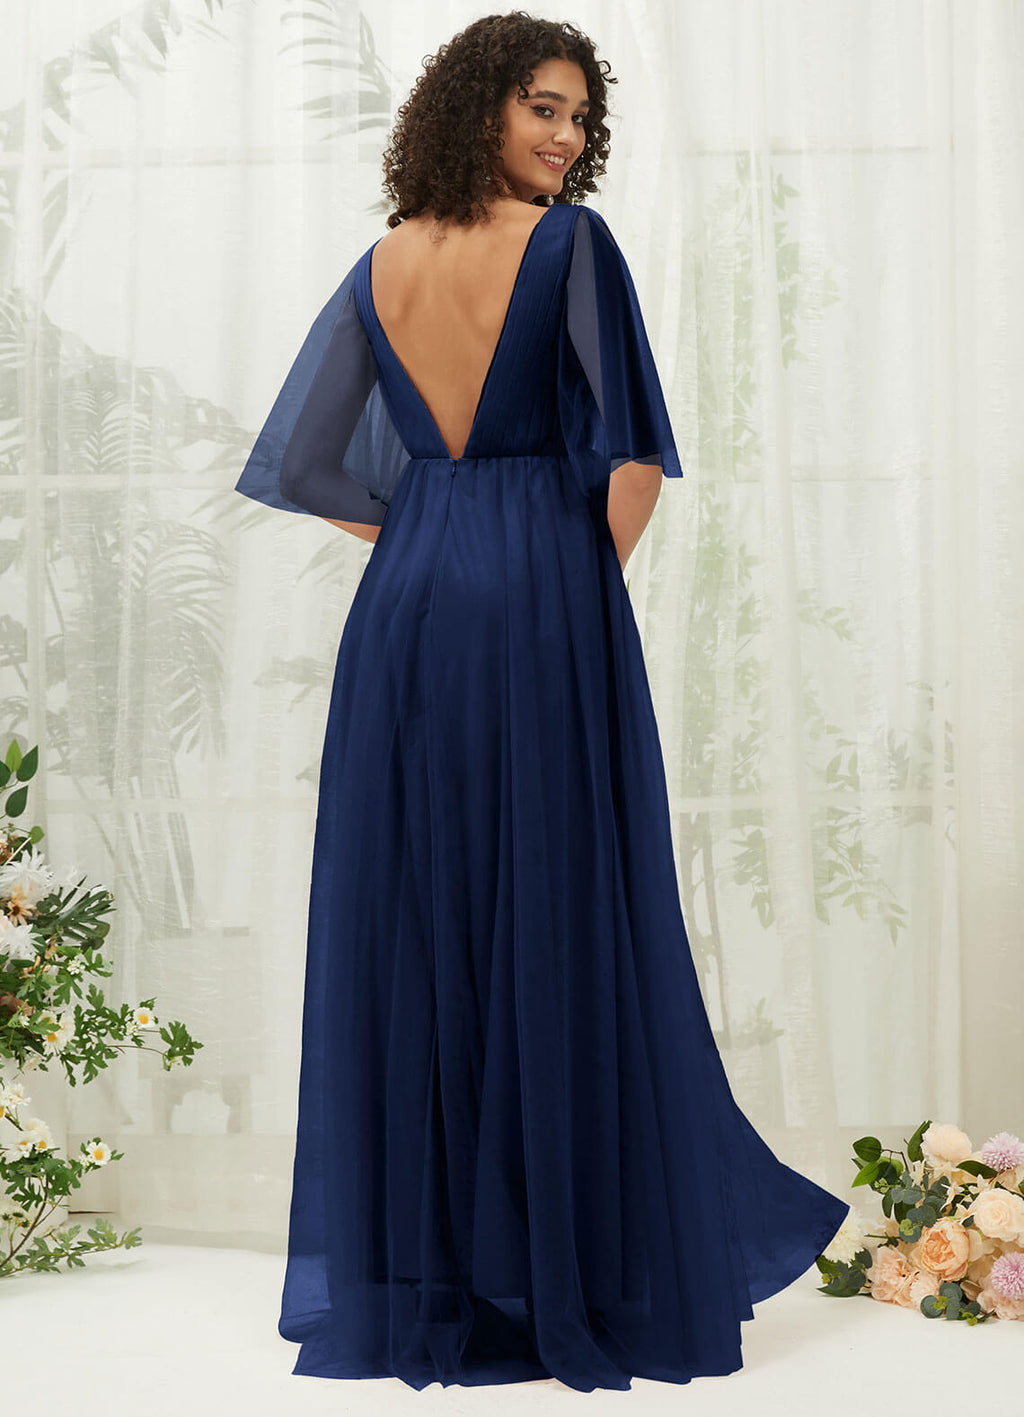 NZ Bridal Navy Blue Backless Flowy Tulle bridesmaid dresses R1026 Thea a